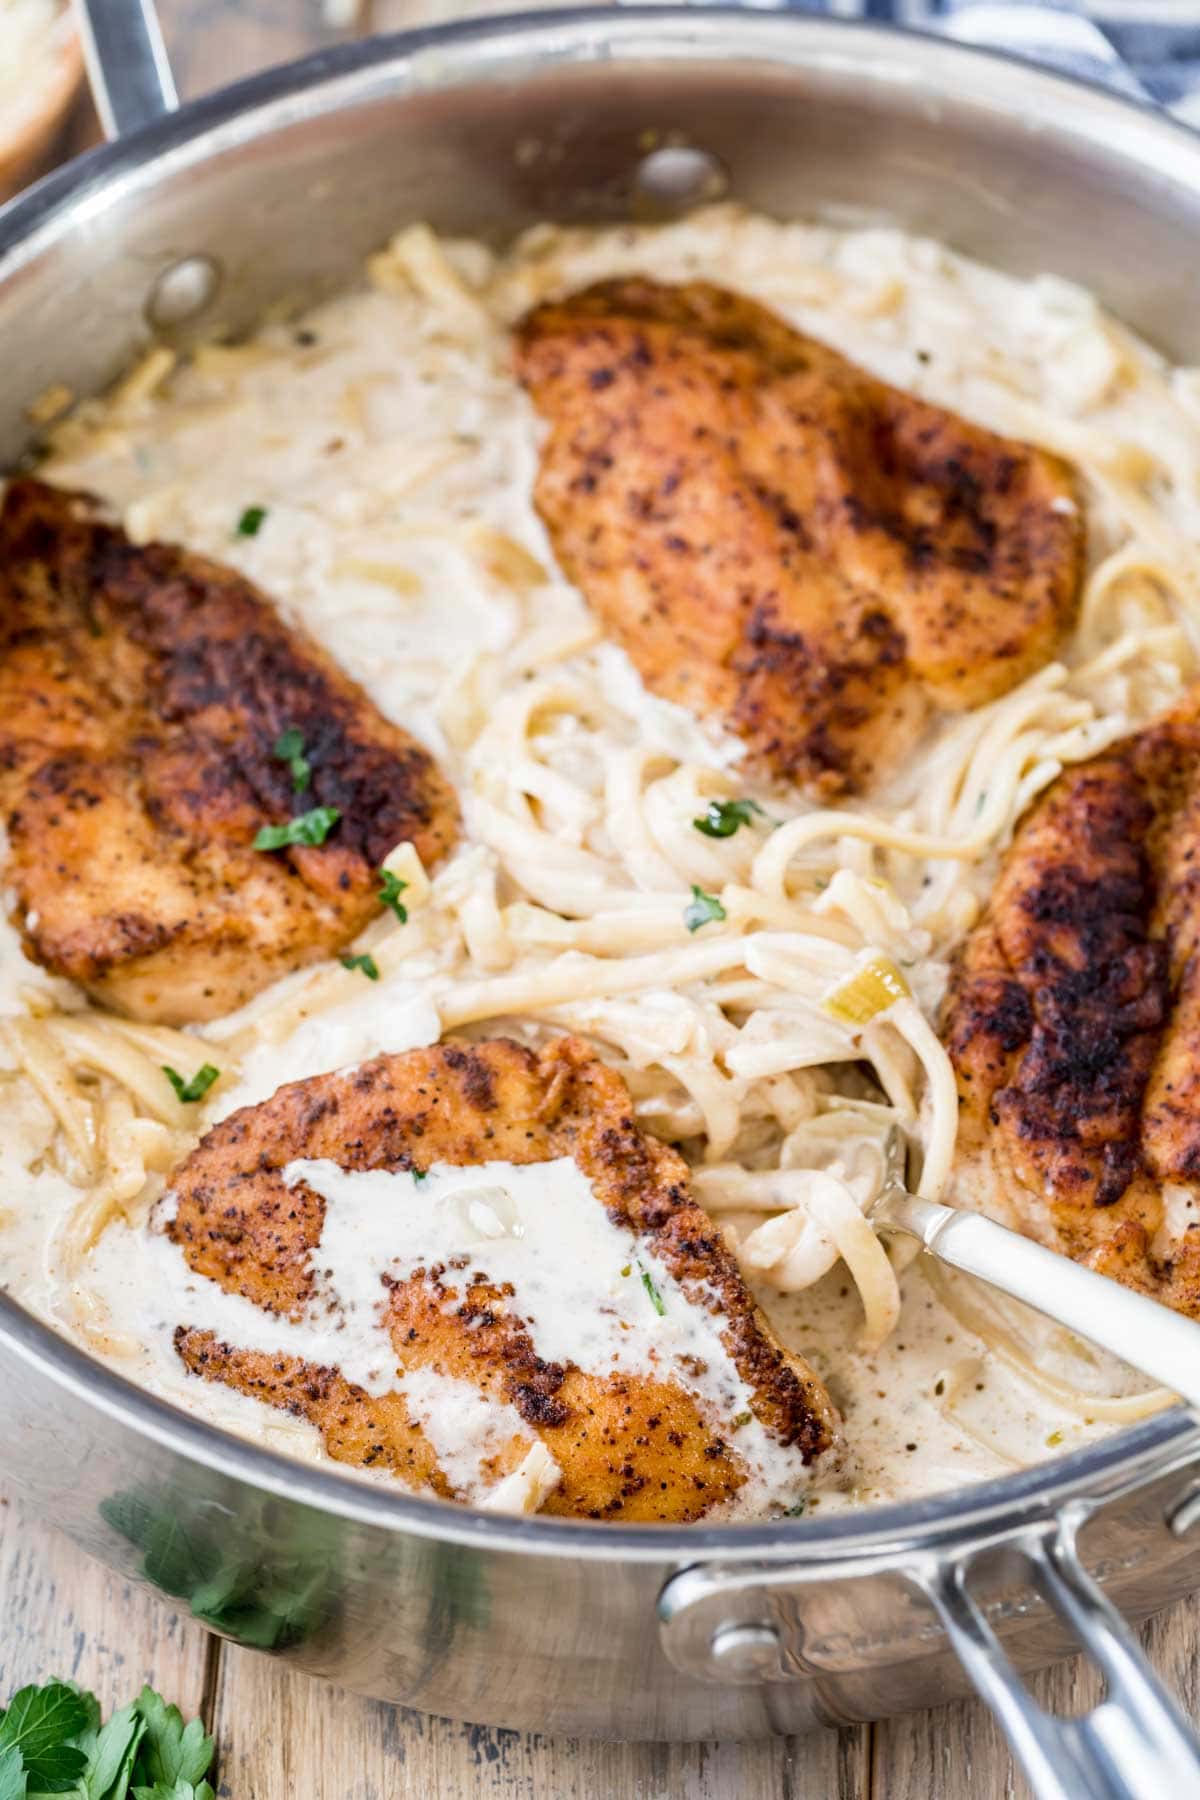 creamy chicken pasta dinner consisting of linguine pasta in a garlic cream sauce topped with seasoned chicken breasts